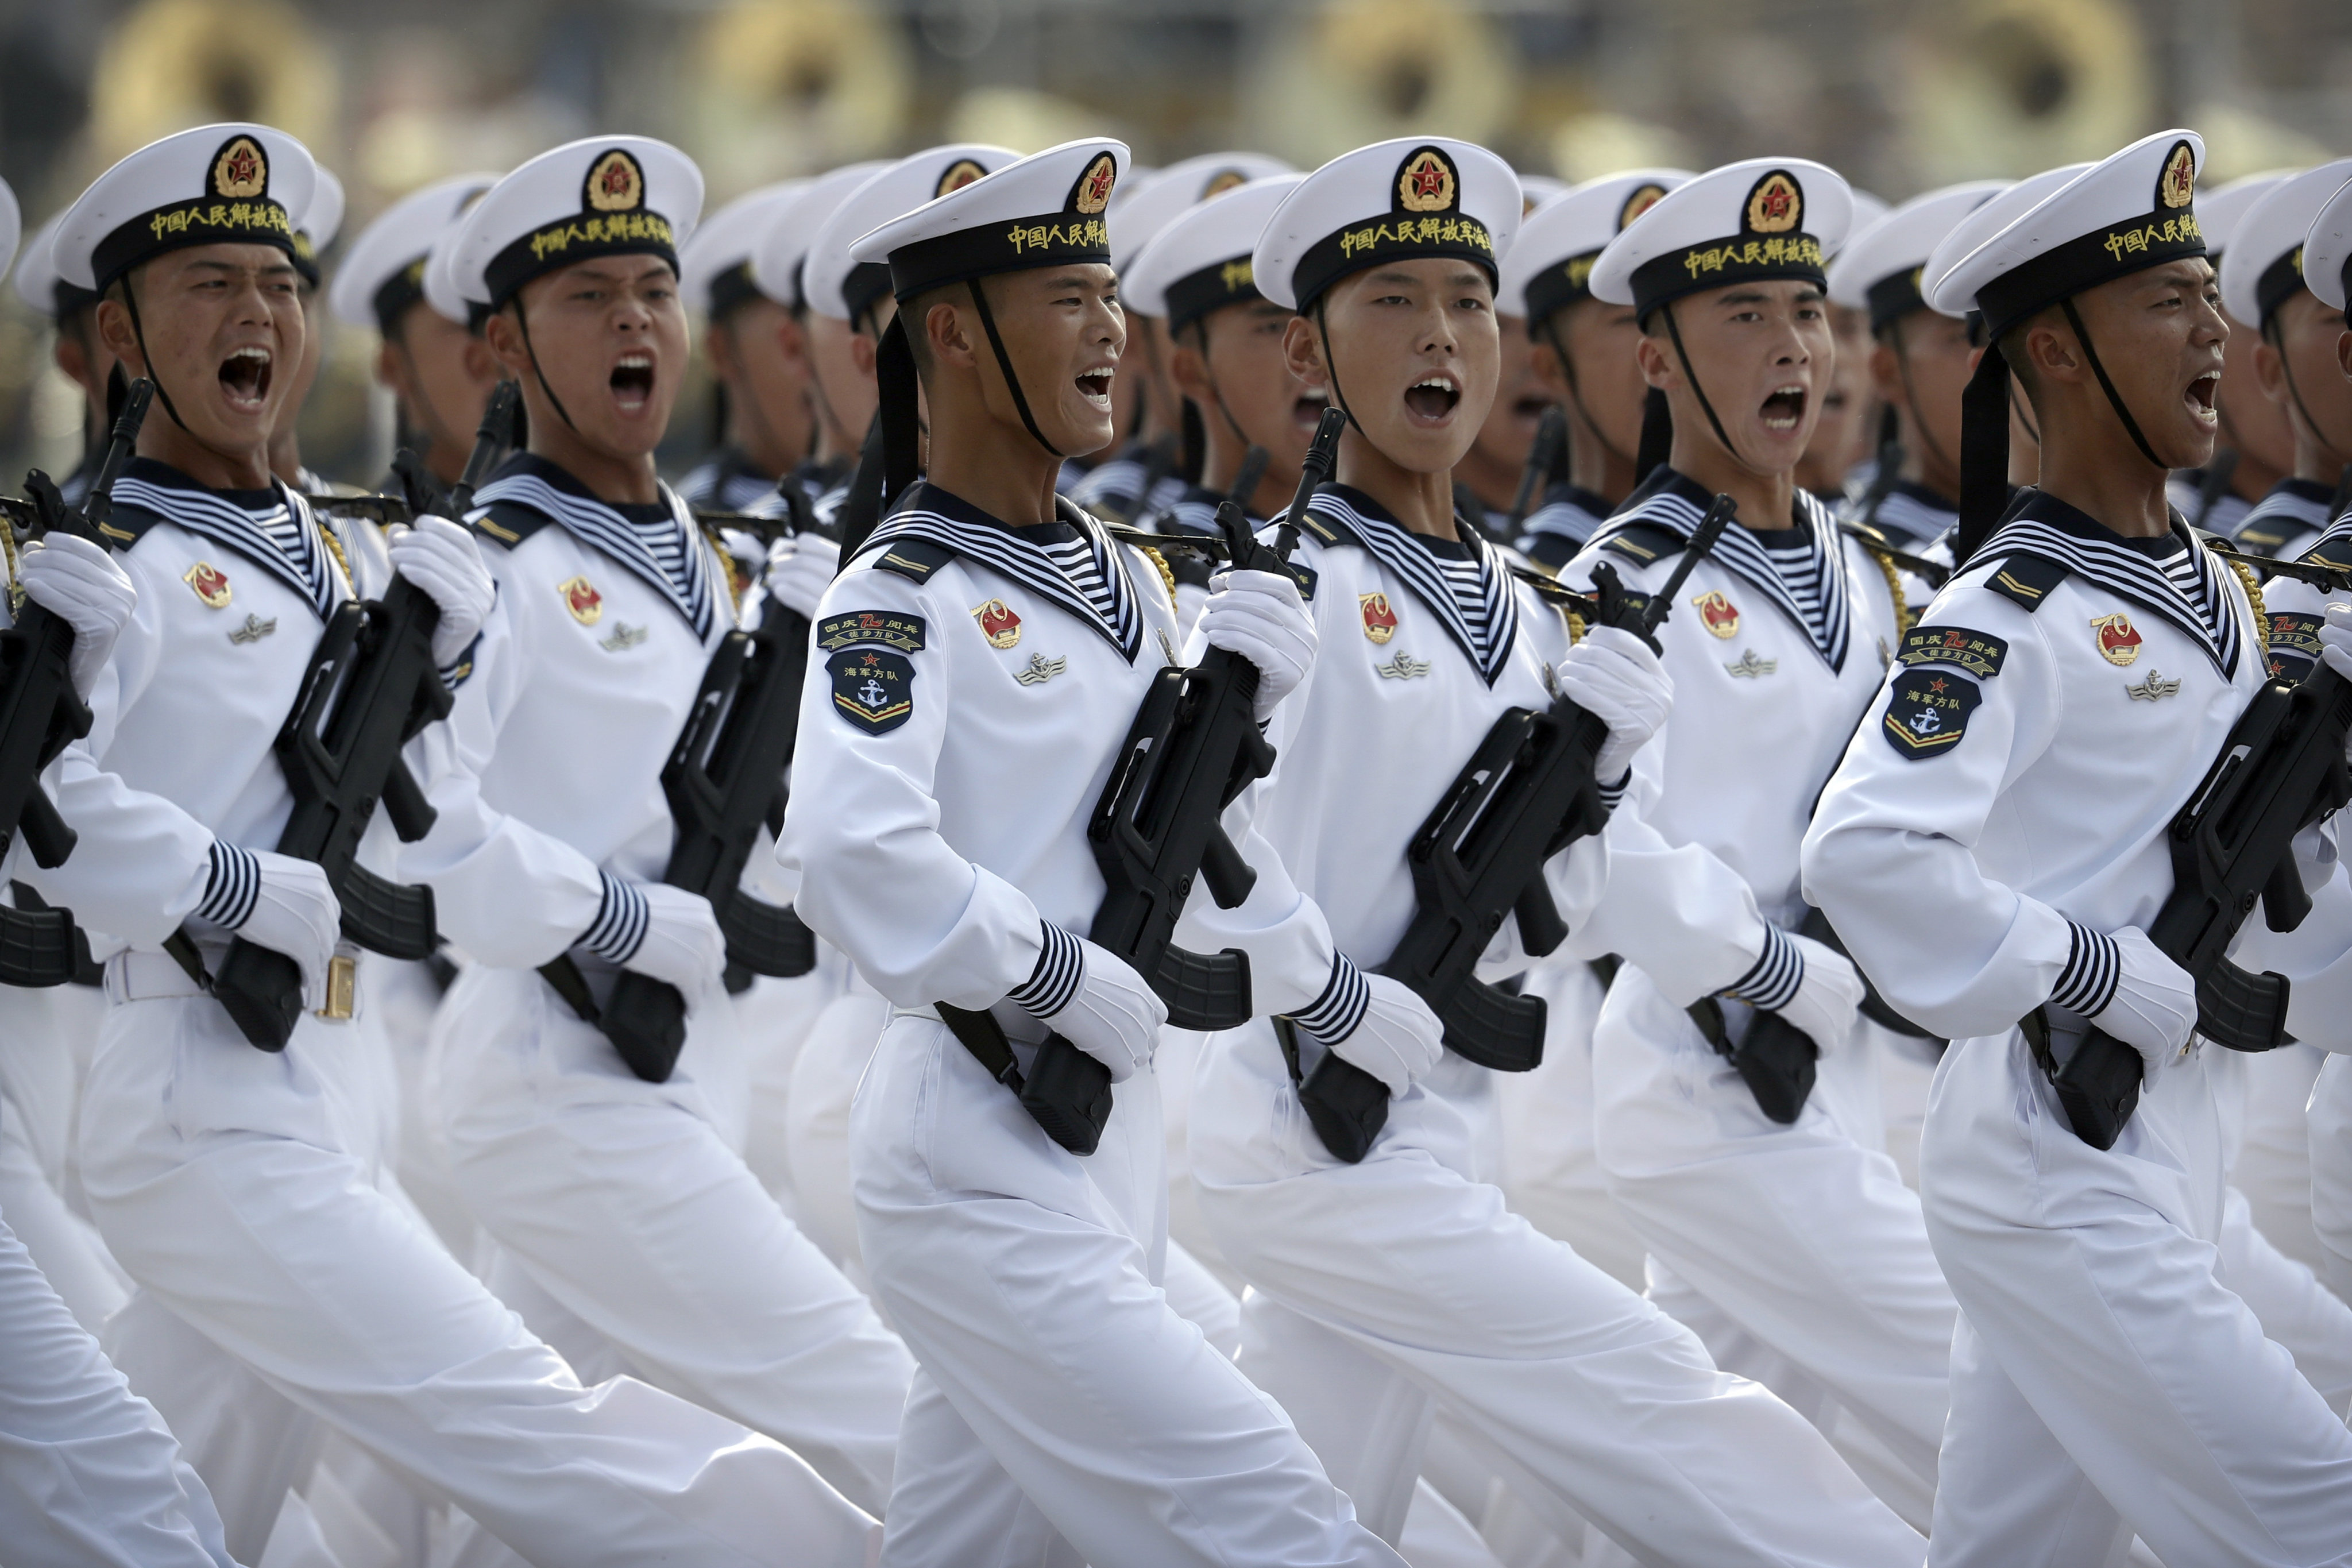 Soldiers from China’s People’s Liberation Army (PLA) Navy march in a parade to commemorate the 70th anniversary of the founding of Communist China in Beijing in 2019. Britain’s national security adviser has called for better communication between the West and China and Russia to avoid a nuclear conflict. Photo: AP